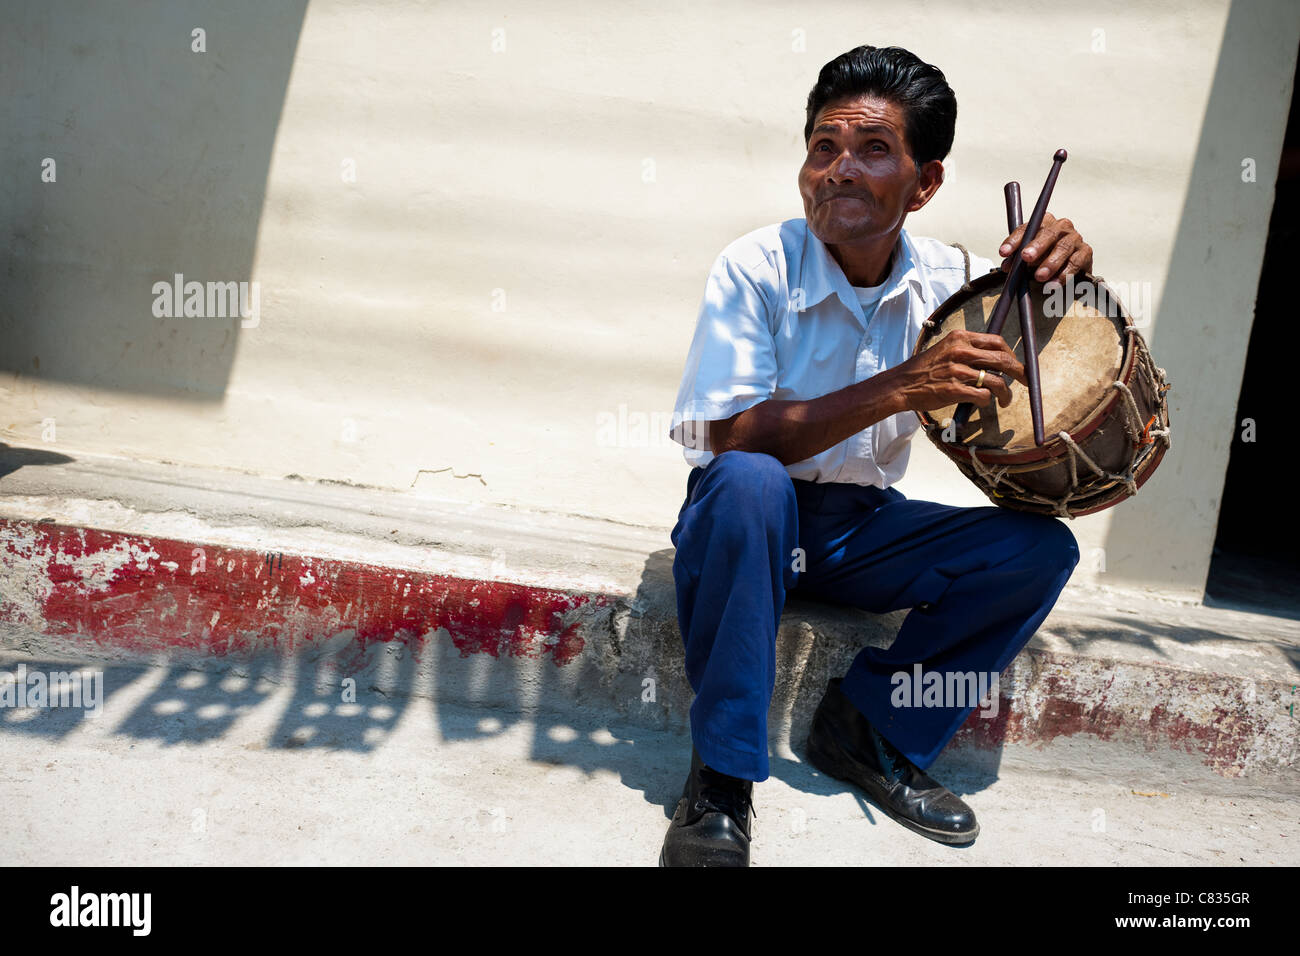 A Salvadoran man plays a drum during the procession of the Flower & Palm Festival in Panchimalco, El Salvador. Stock Photo